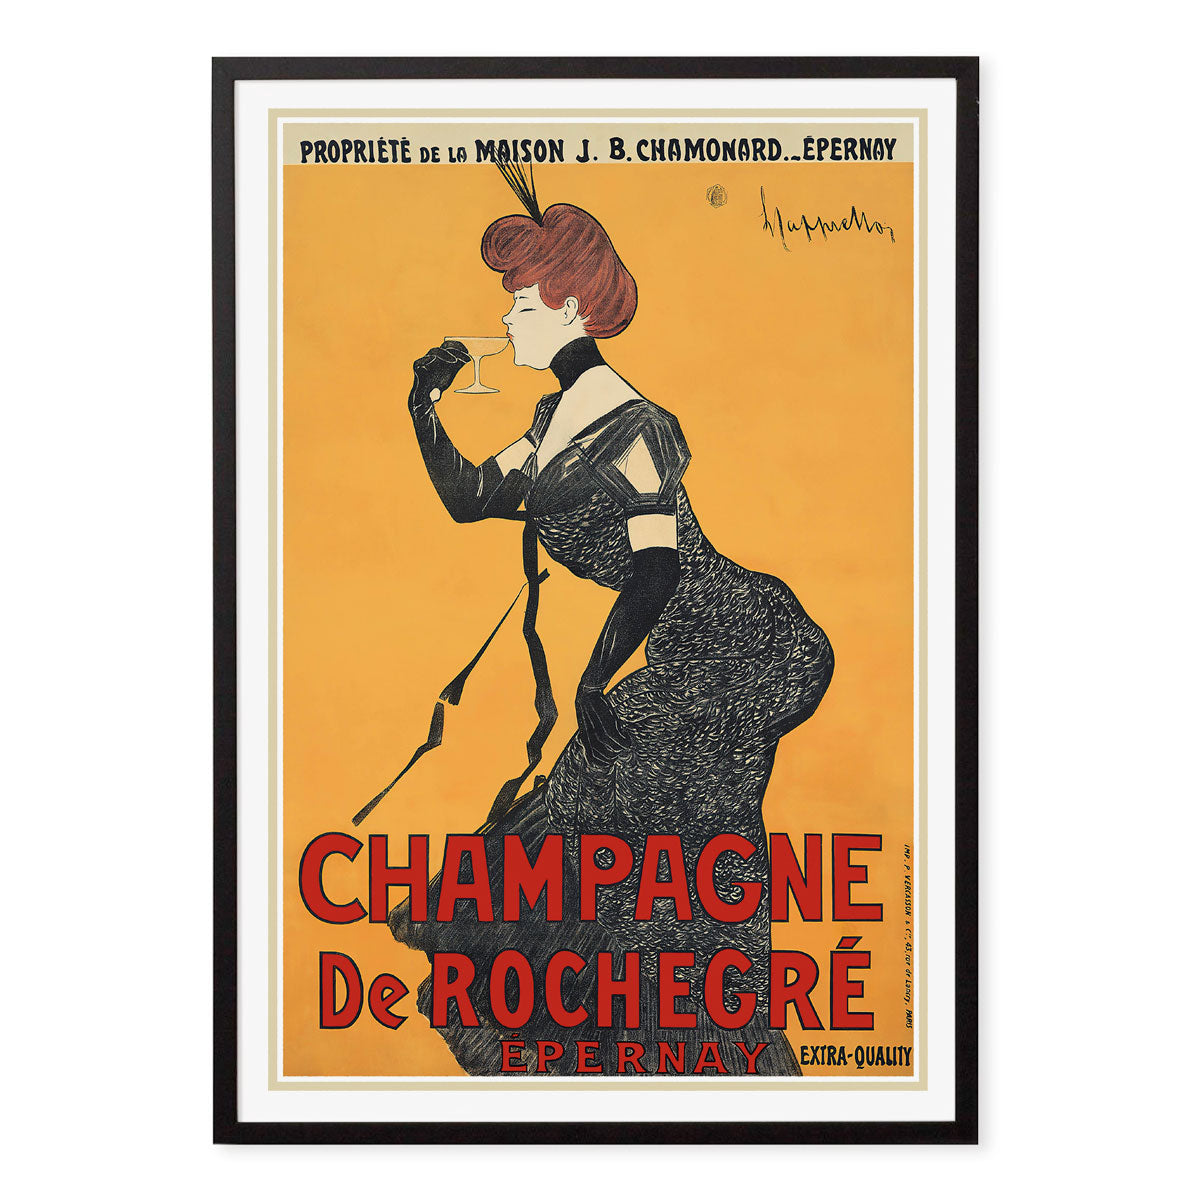 French Champagne De Rochegre vintage retro advertising poster | Places We Luv